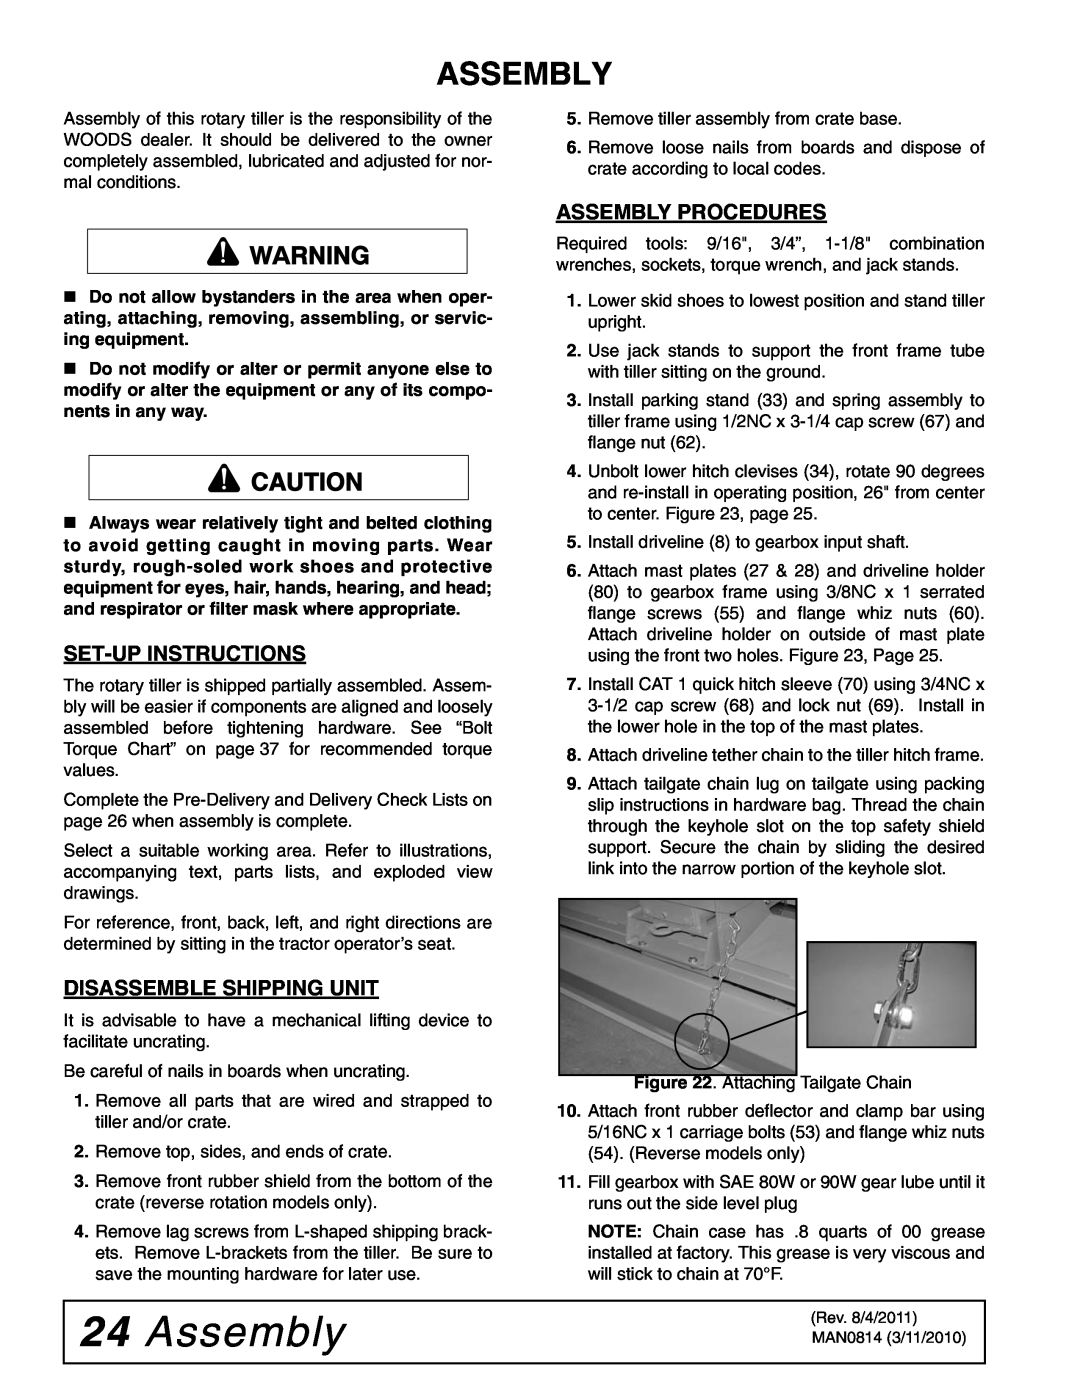 Woods Equipment TS52, TS44 manual Set-Up Instructions, Disassemble Shipping Unit, Assembly Procedures 